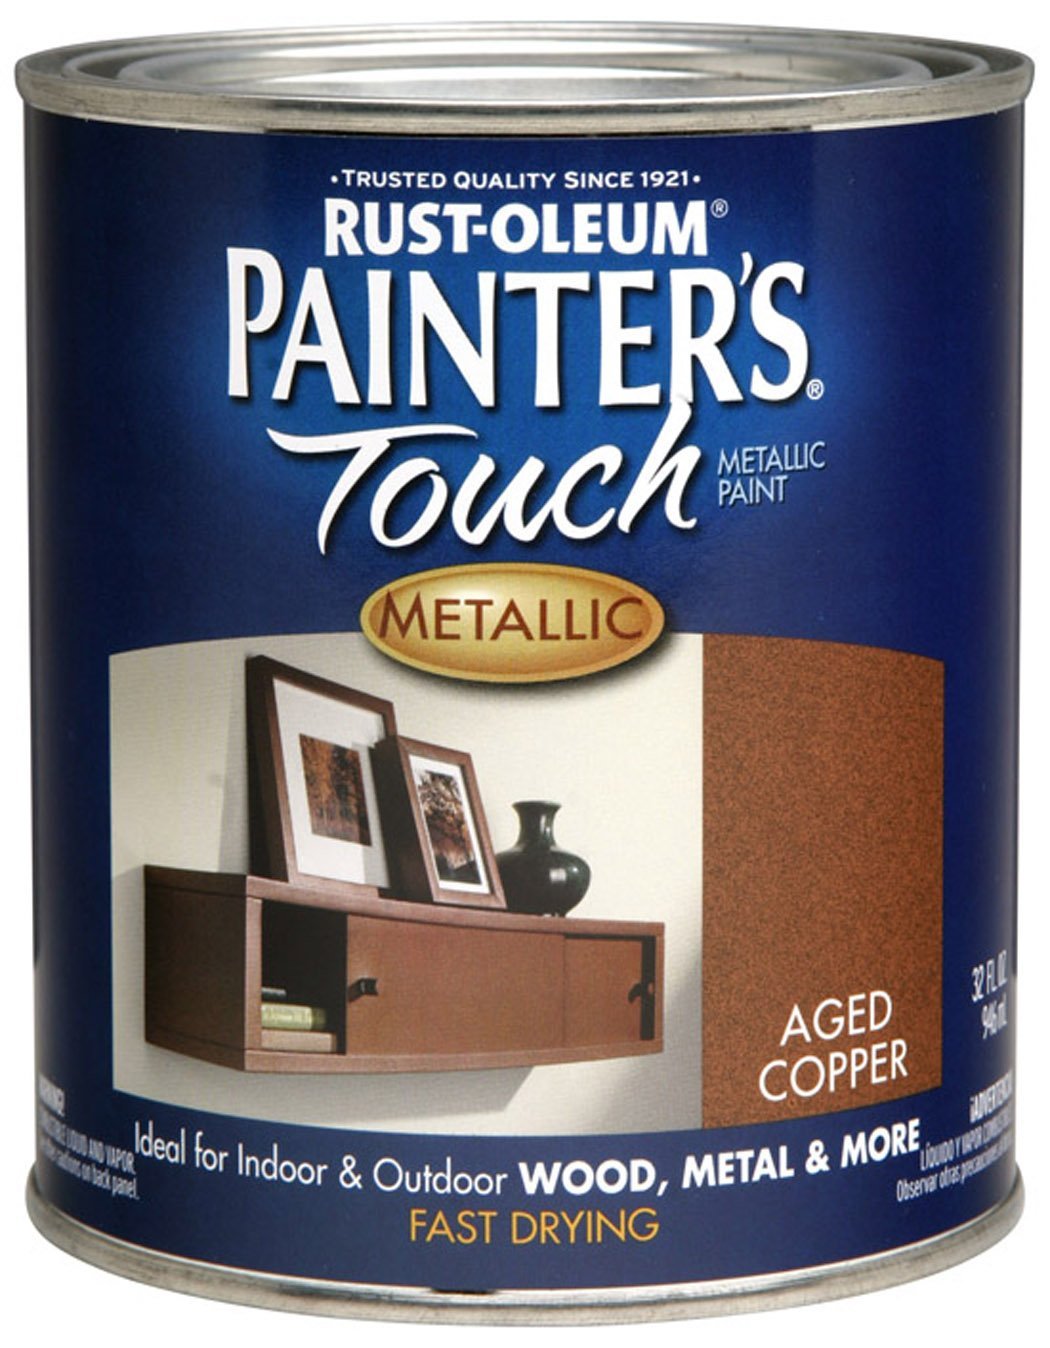 buy paint & painting items at cheap rate in bulk. wholesale & retail paint & painting supplies store. home décor ideas, maintenance, repair replacement parts